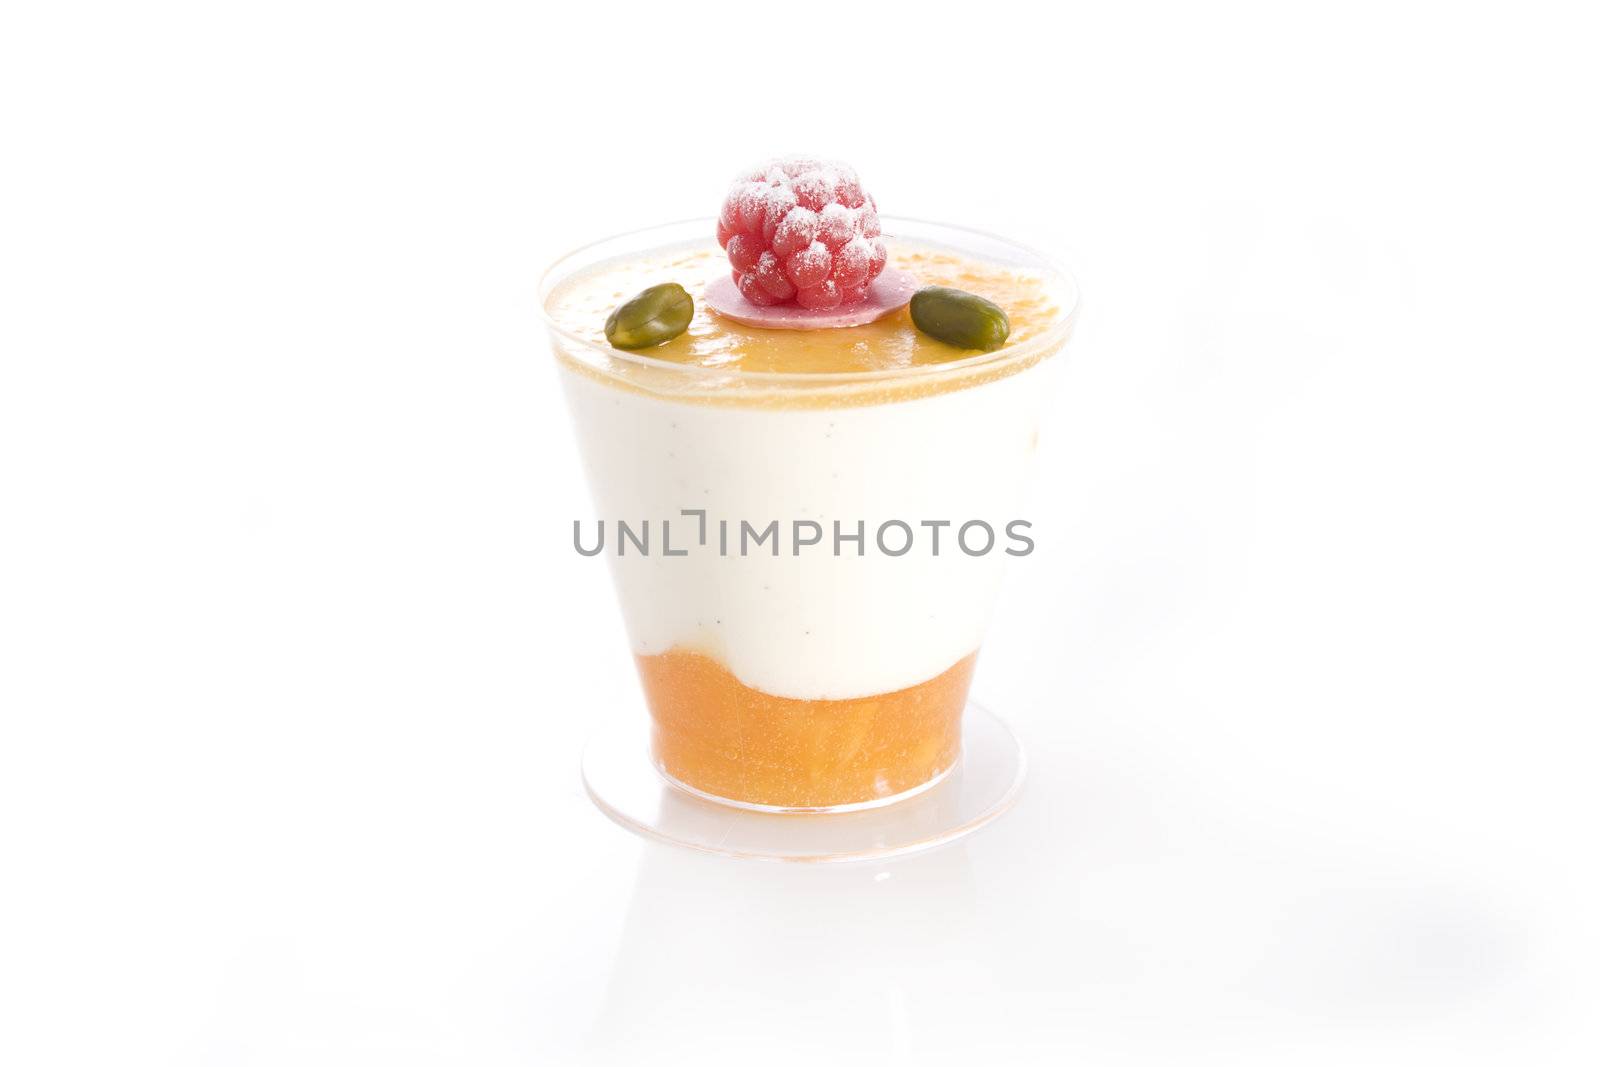 Isolated shot of Vanilla and mango mousse with raspberry and pistachio topping.